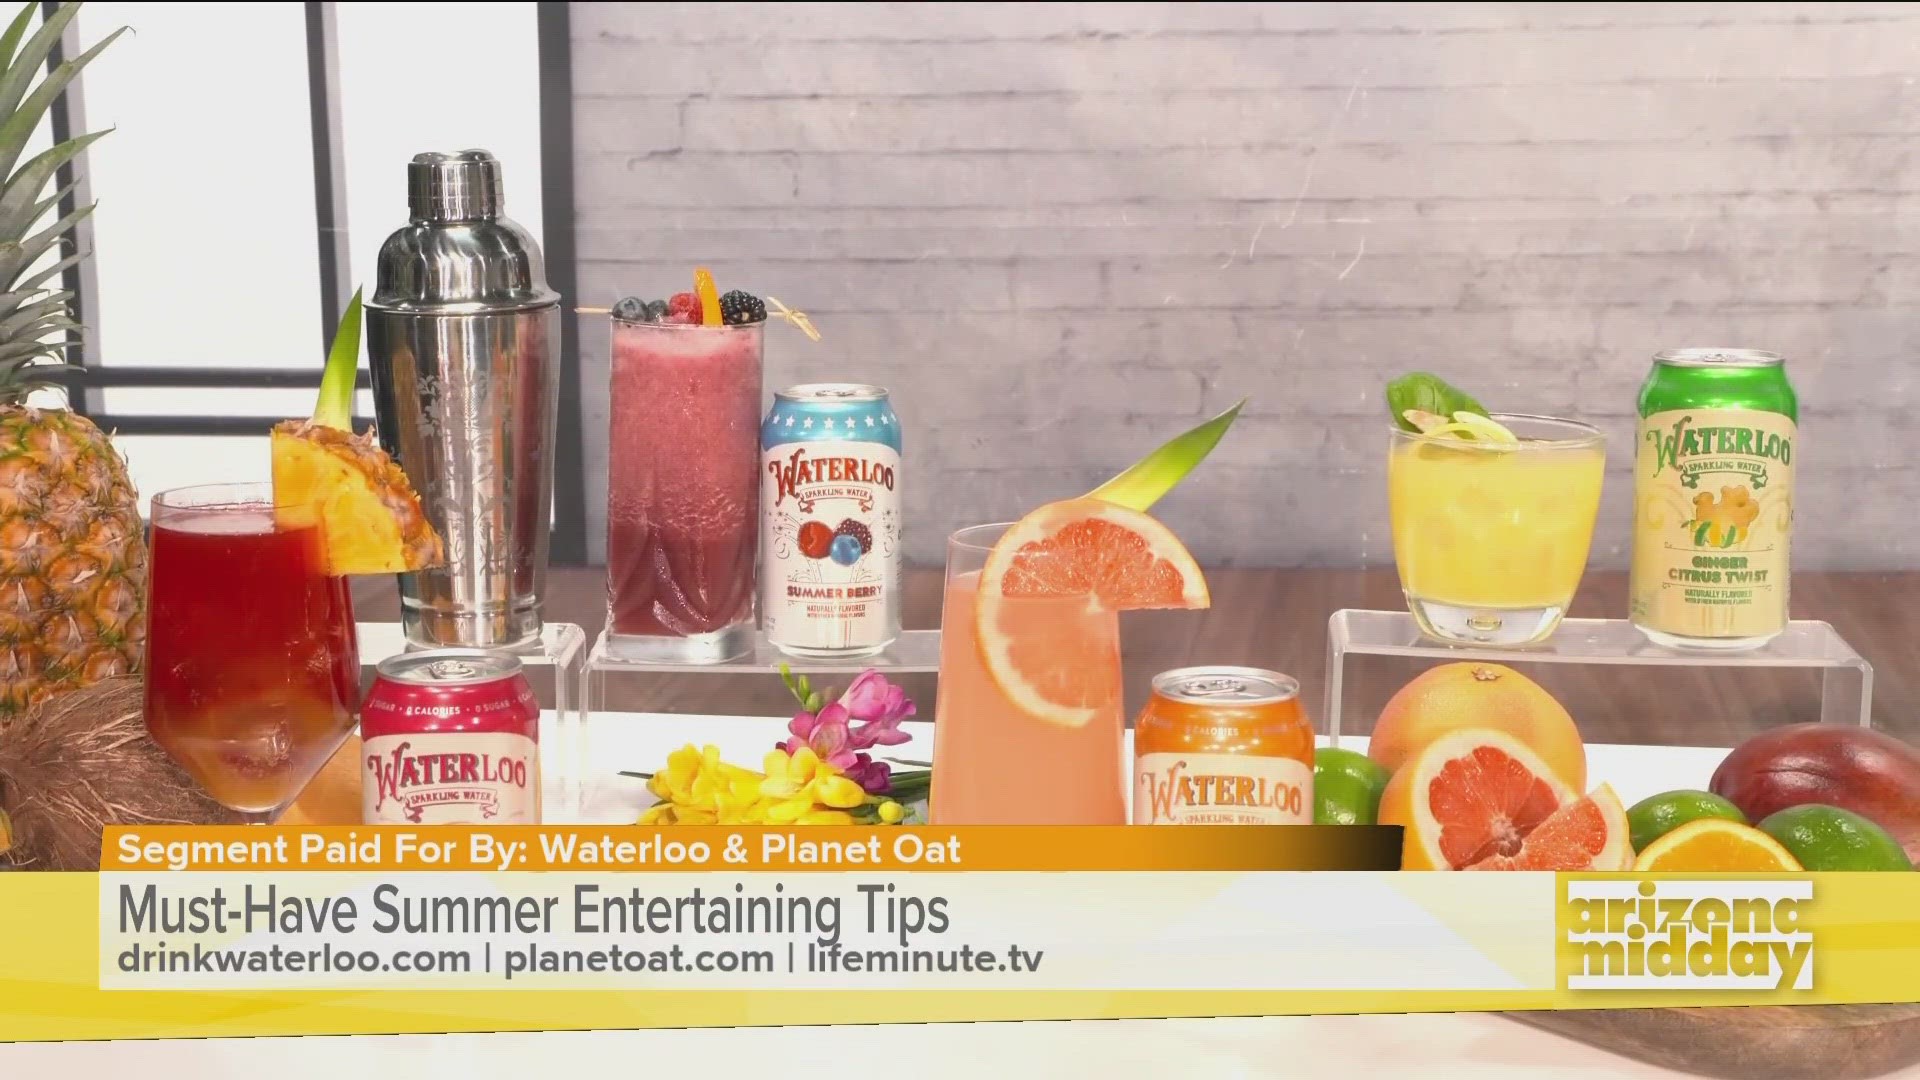 Joann Butler teamed up with Waterloo and Planet Oat to give us some unique entertaining tips for your next summer get together.